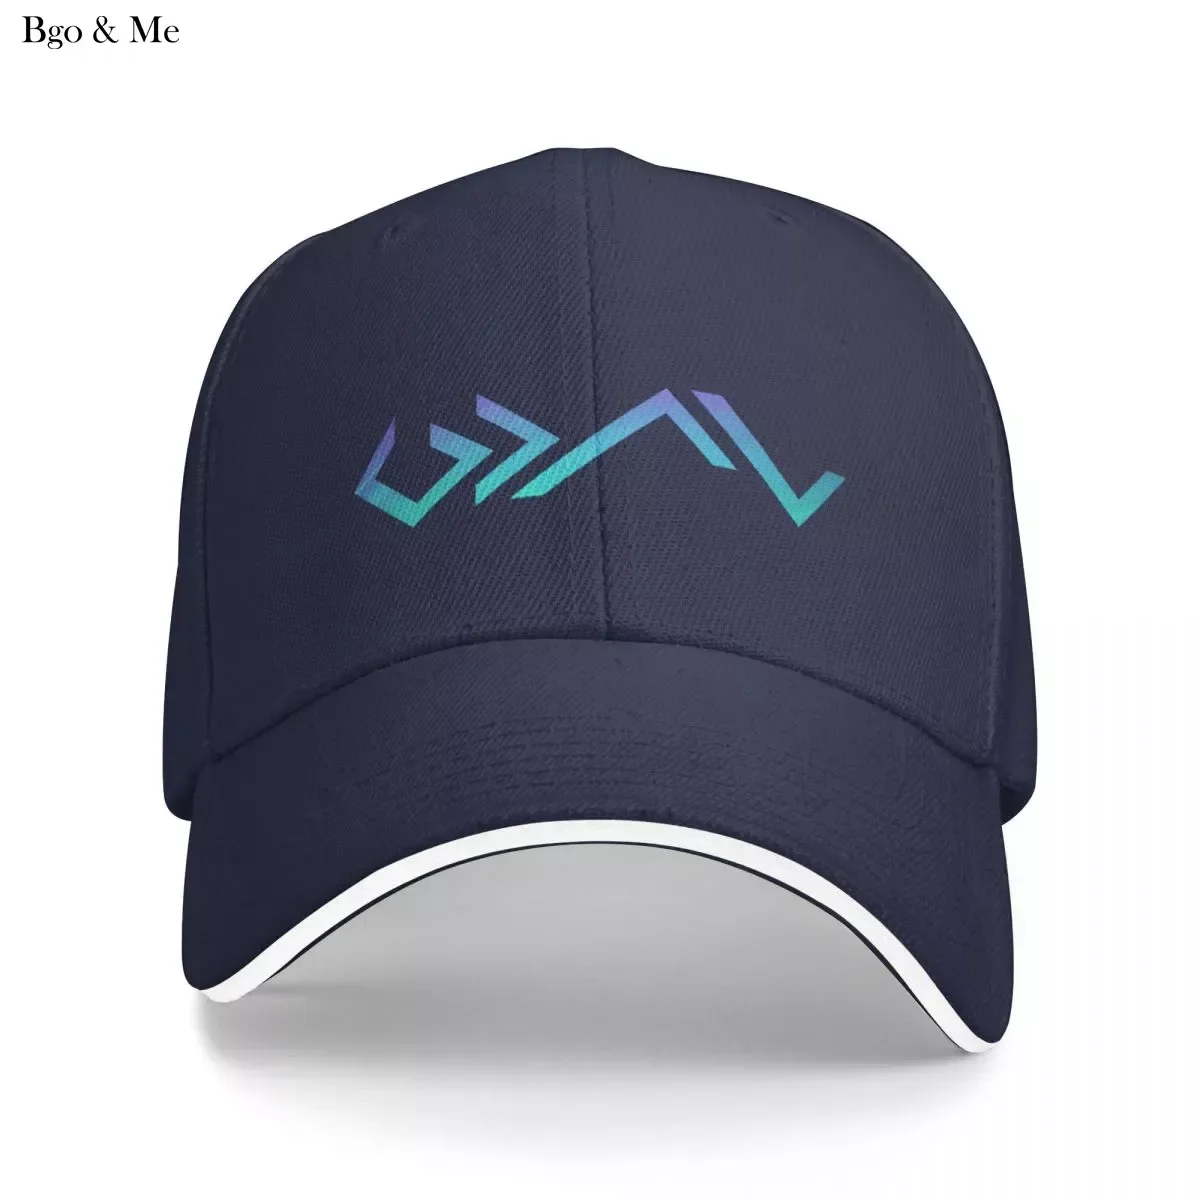 

2023 New God Is Greater Than The Highs And Lows Modern Symbols Christian Teal Baseball Cap Golf Hat Gentleman Hats